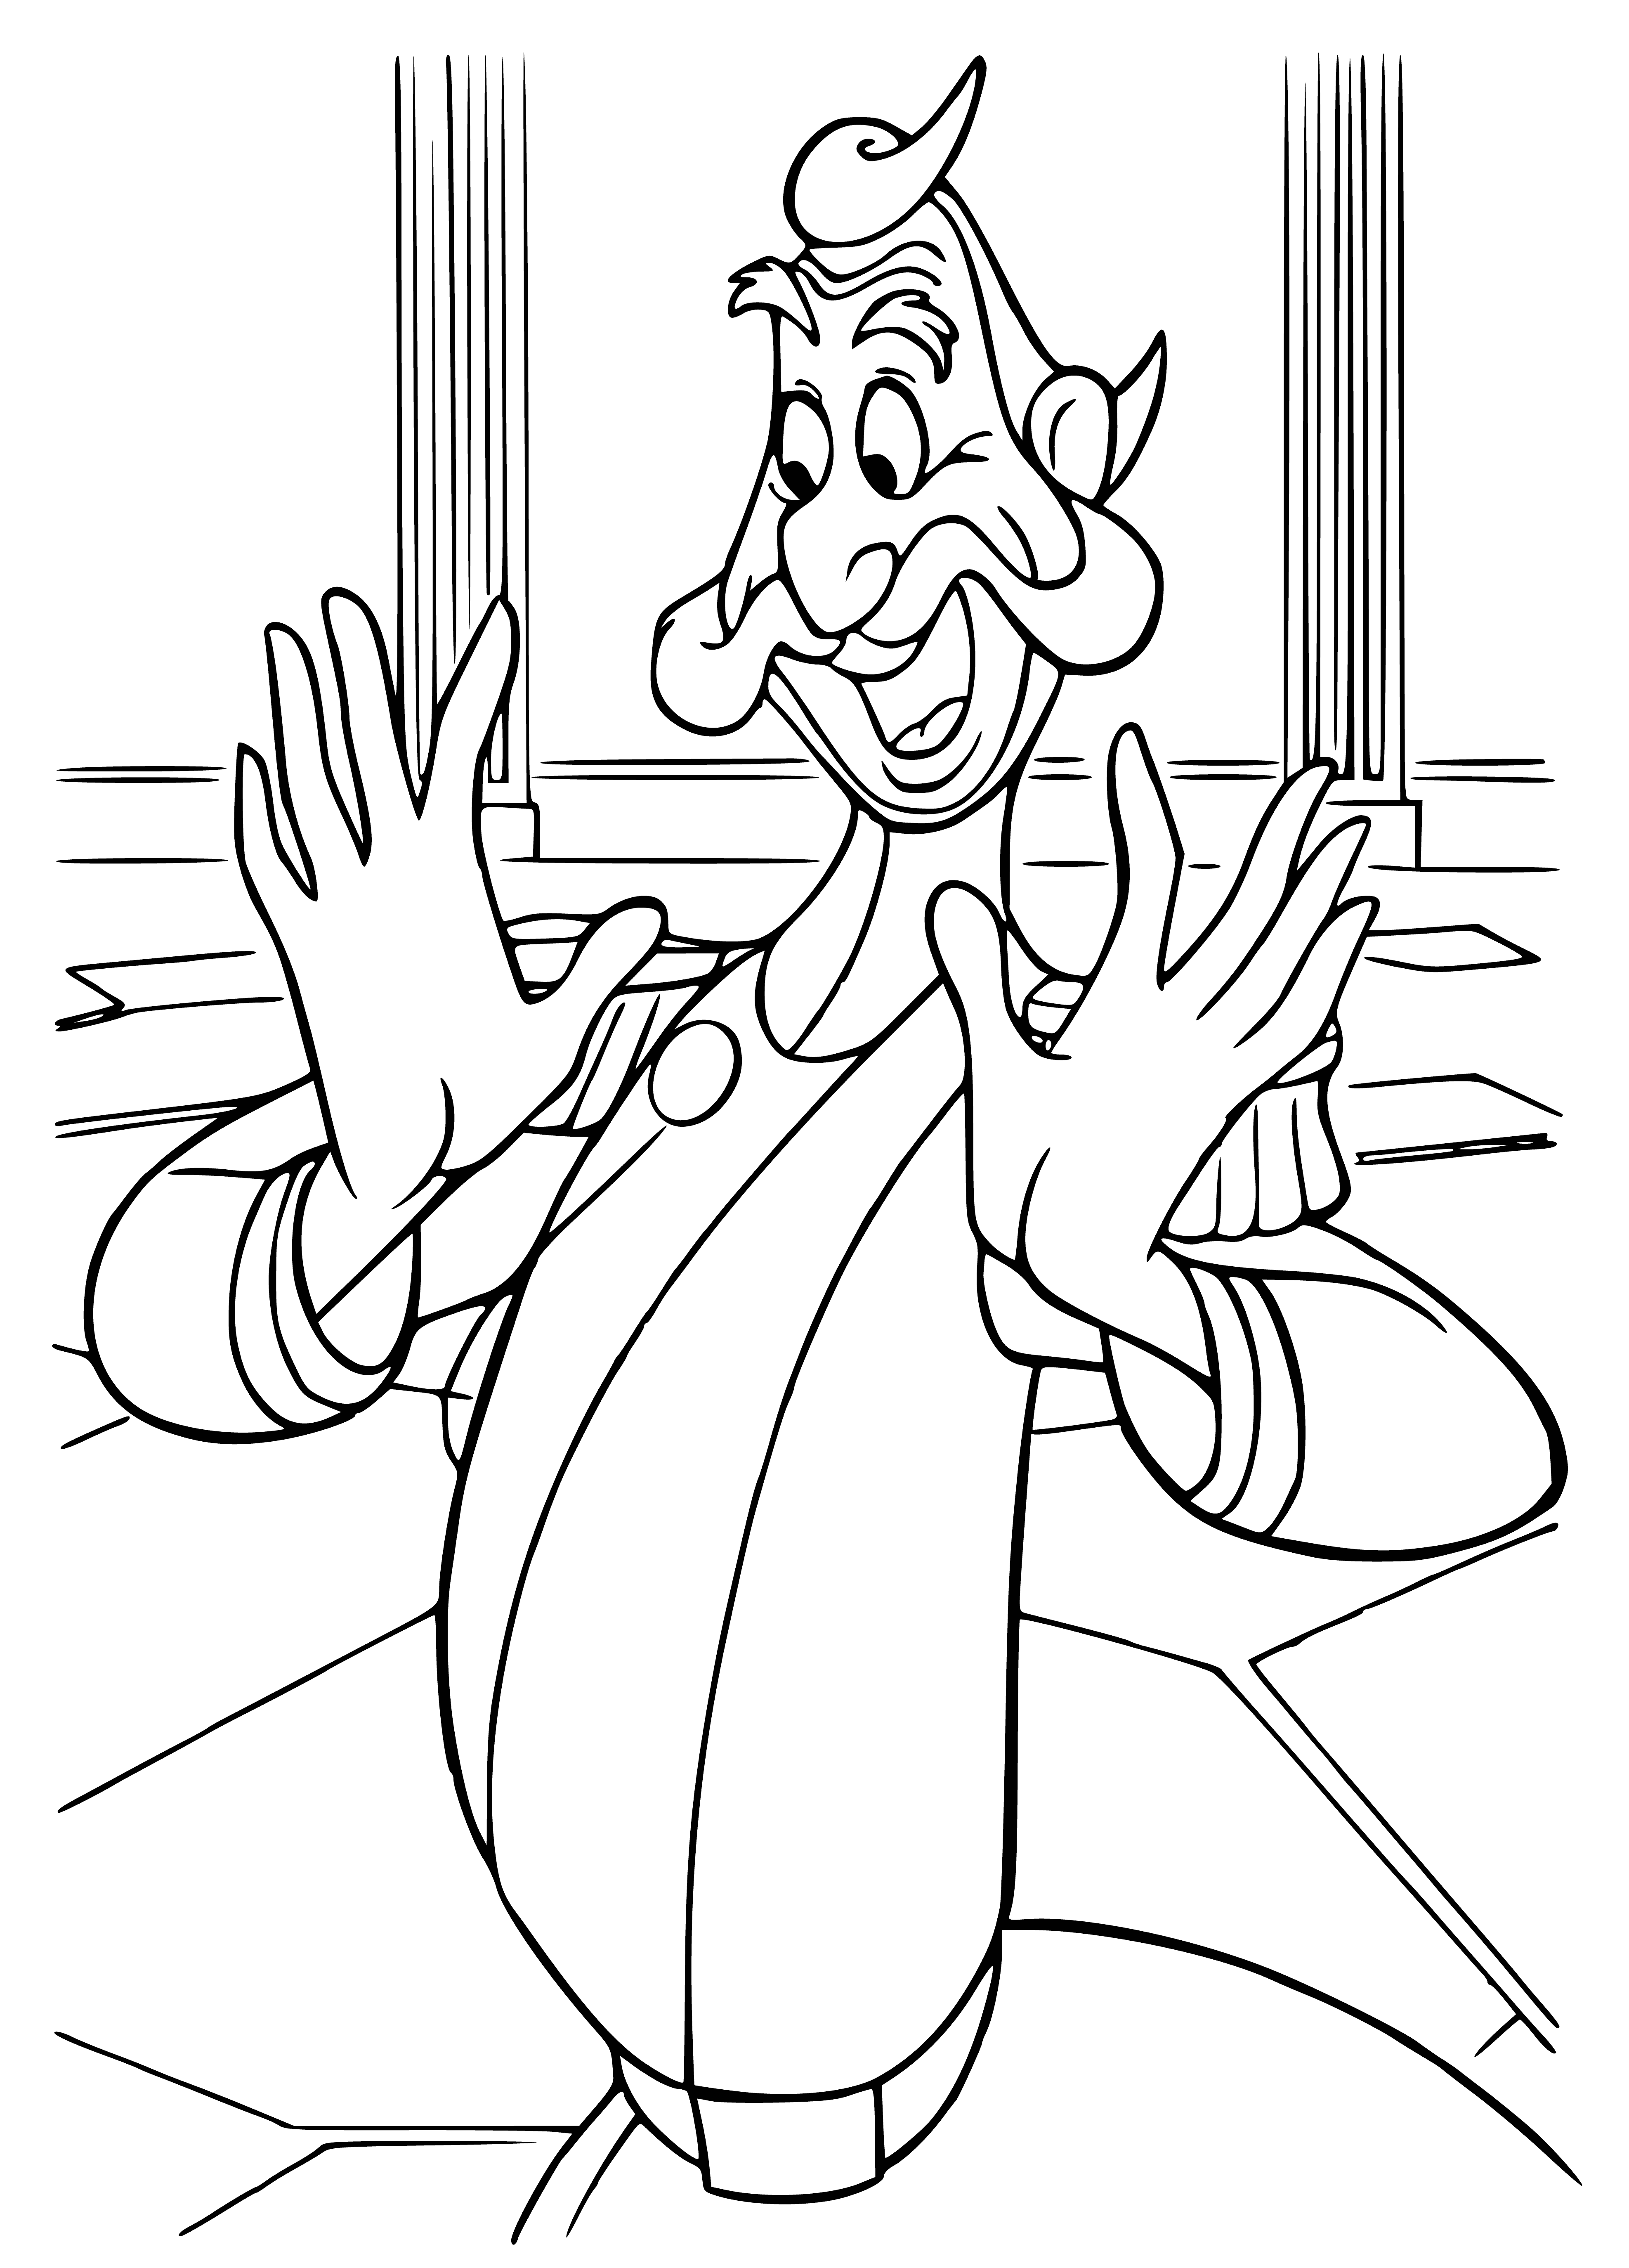 Miraculous salvation coloring page